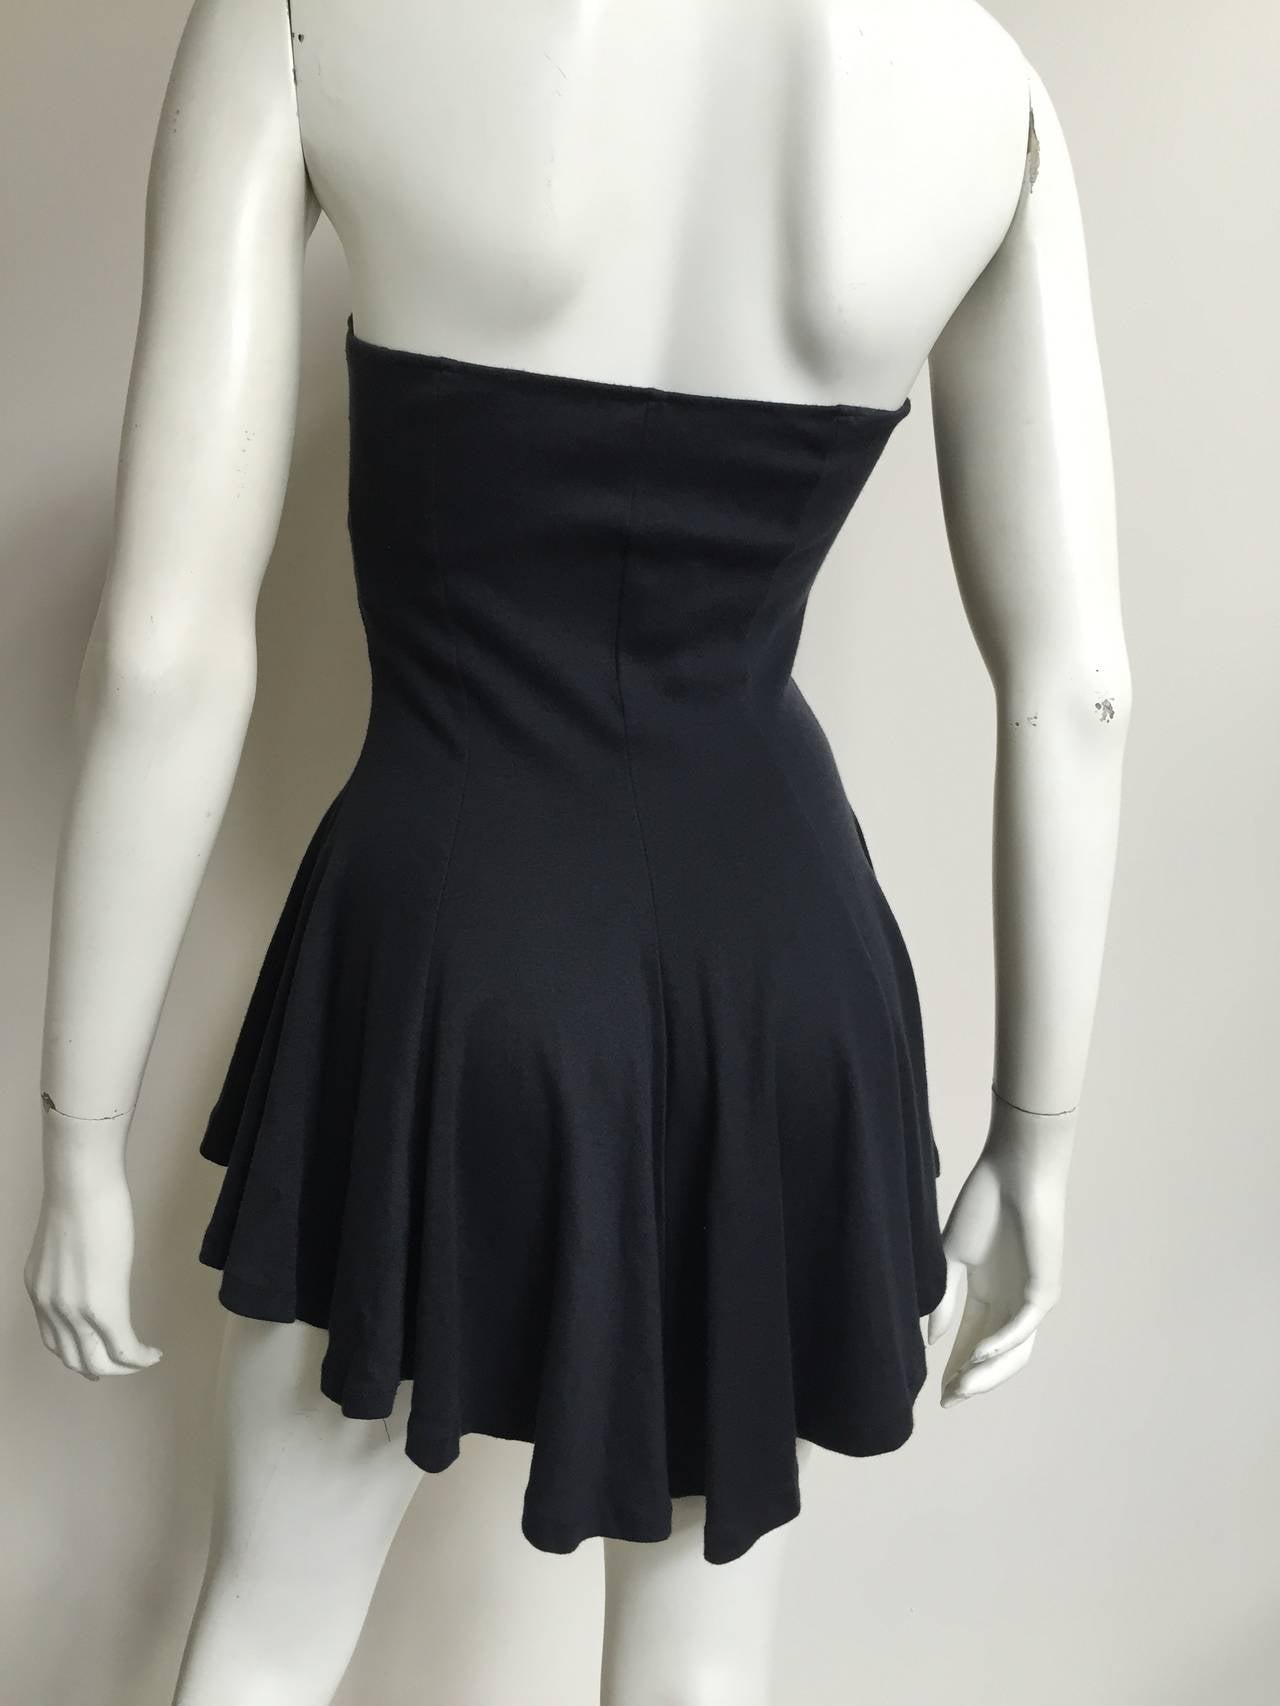 Norma Kamali Black Cotton Strapless Top Size Small. For Sale 1